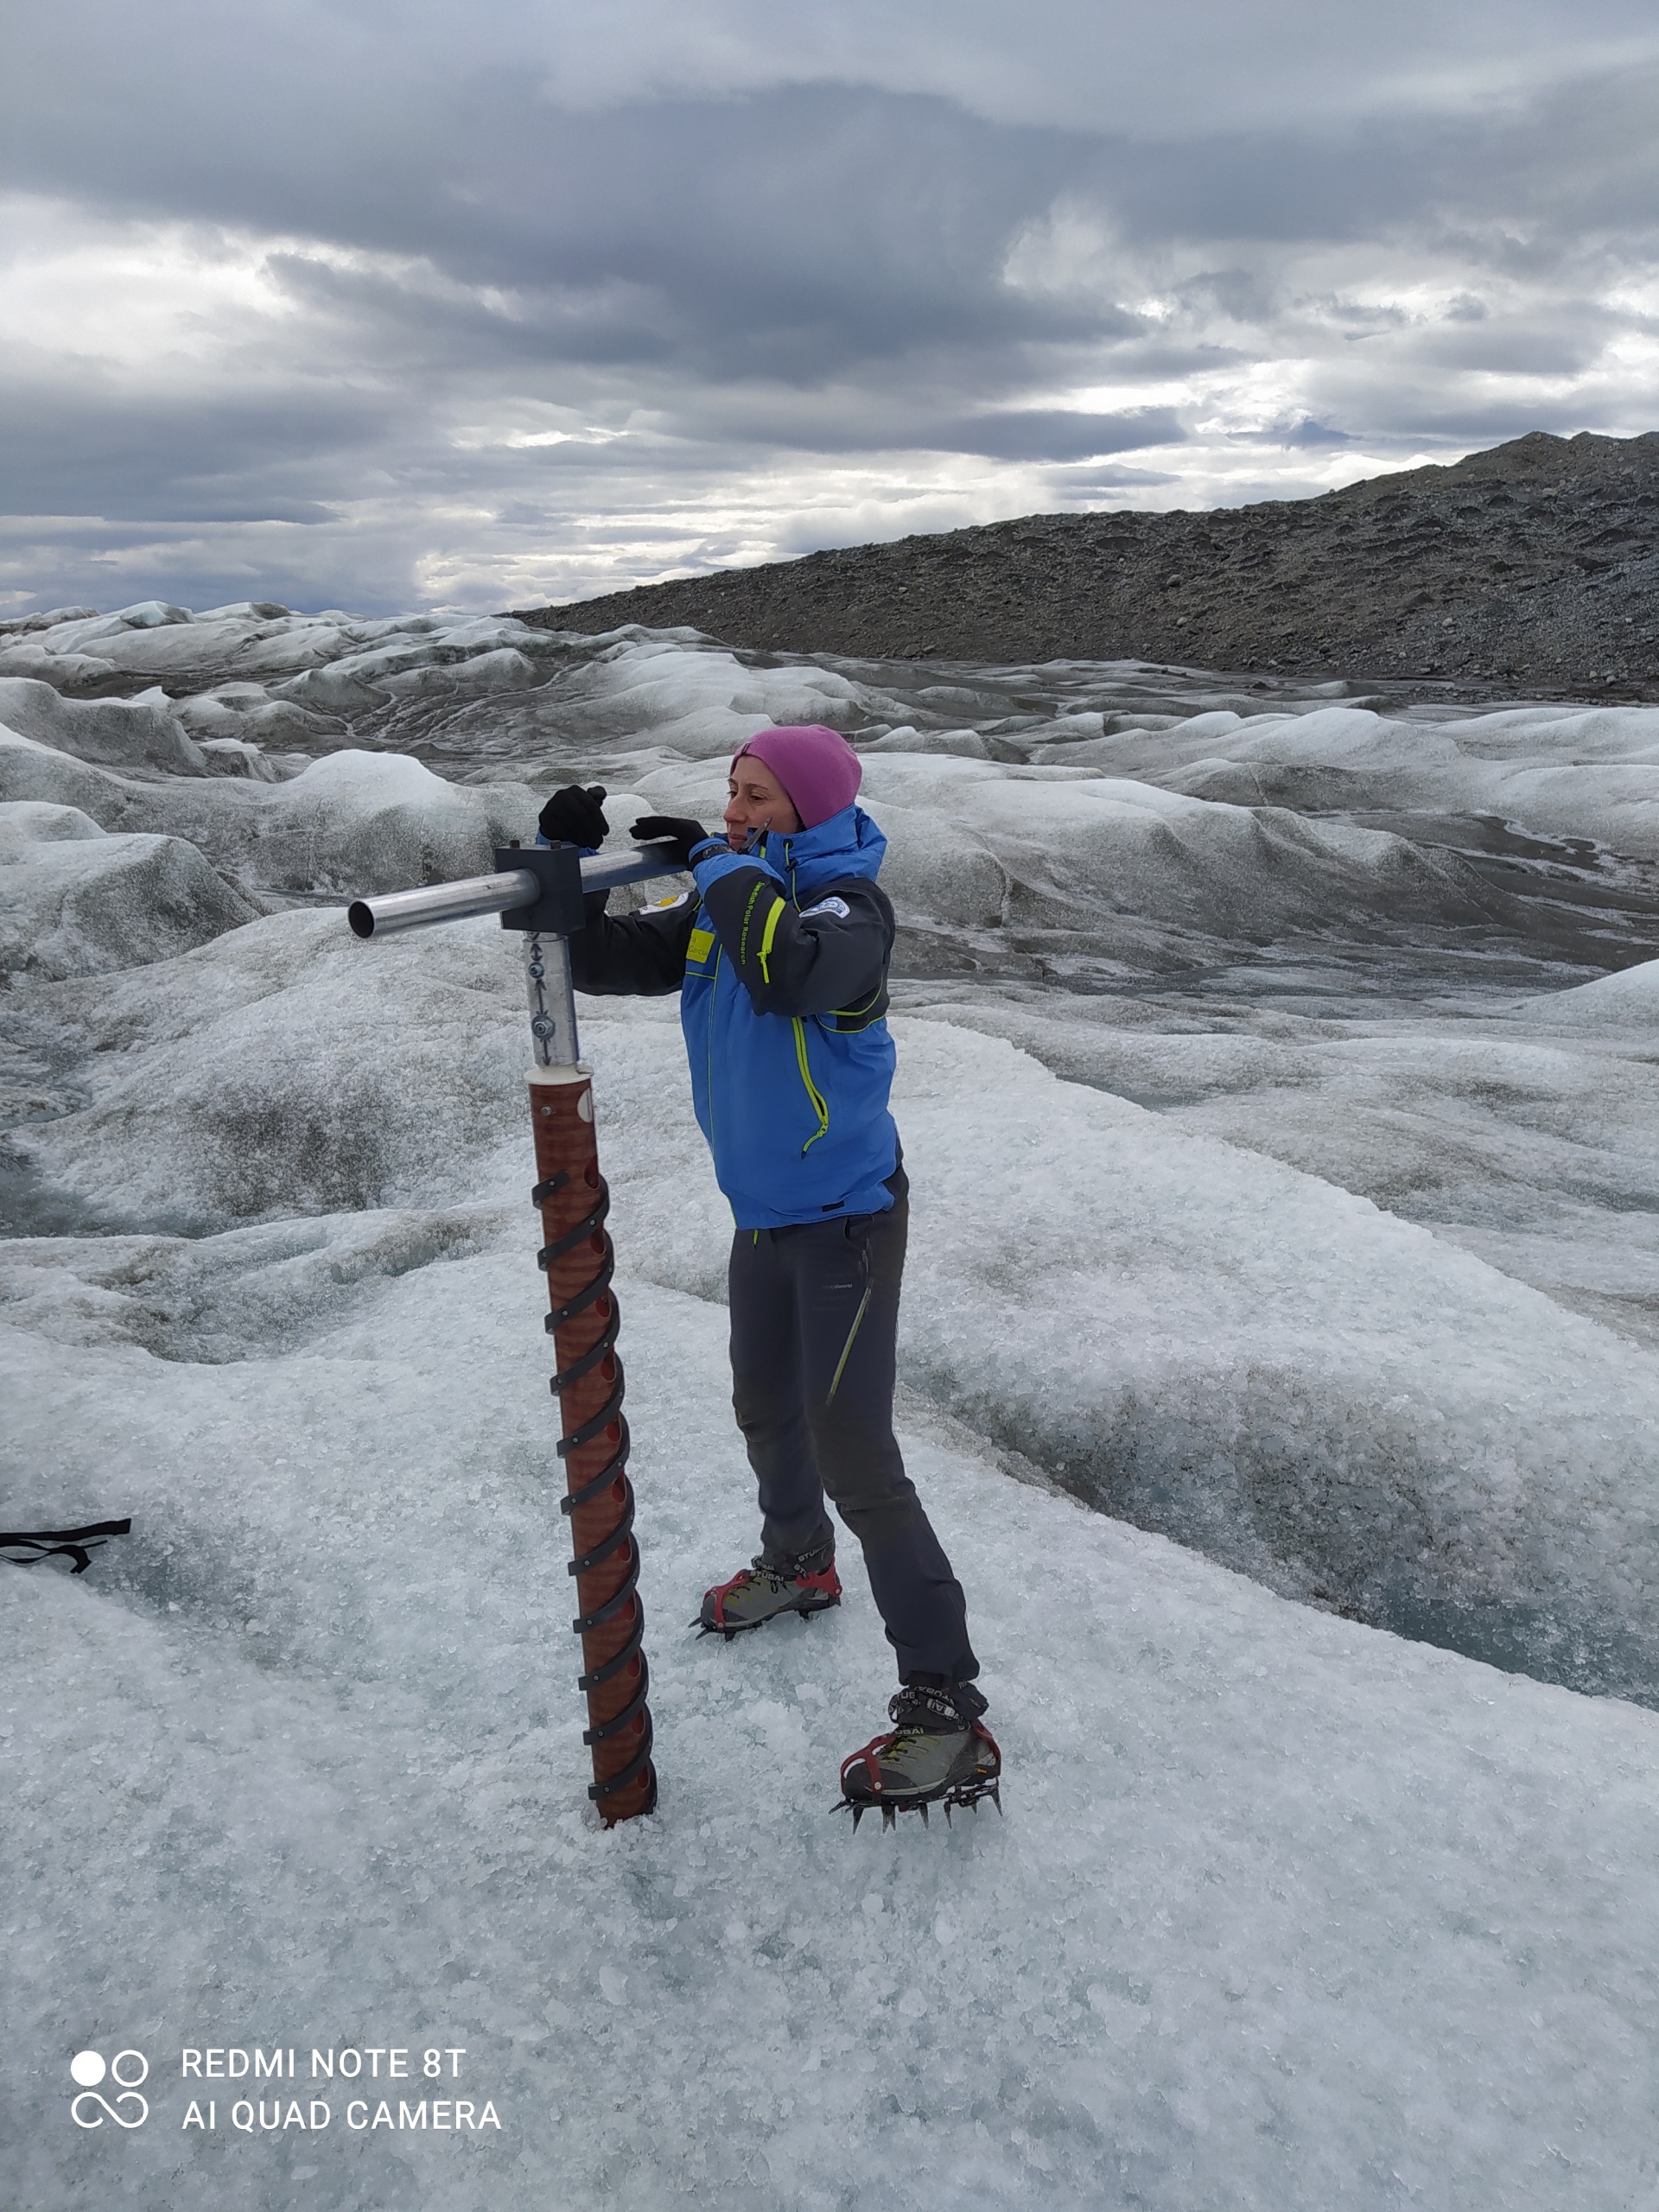 Laura Sánchez-García of the Centro de Astrobiología (INTA-CSIC) starts ice drilling at the Kangerlussuaq Planetary Analogue Field Site in Greenland during a Transnational Access visit in July 2021.